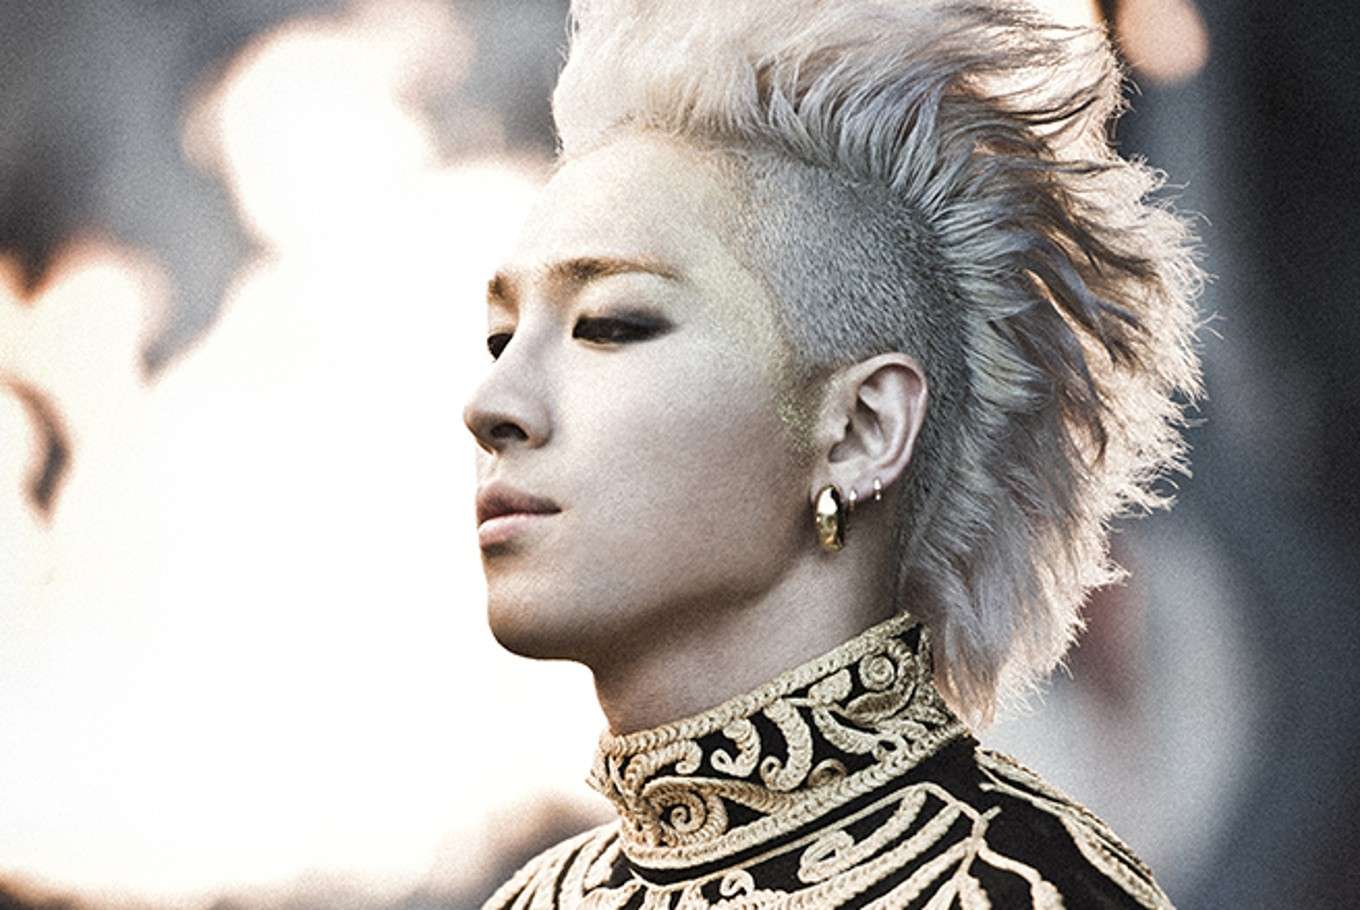 Taeyang Biography: Wife, Parents, Children, Movies, Age, Net Worth, Height, Songs